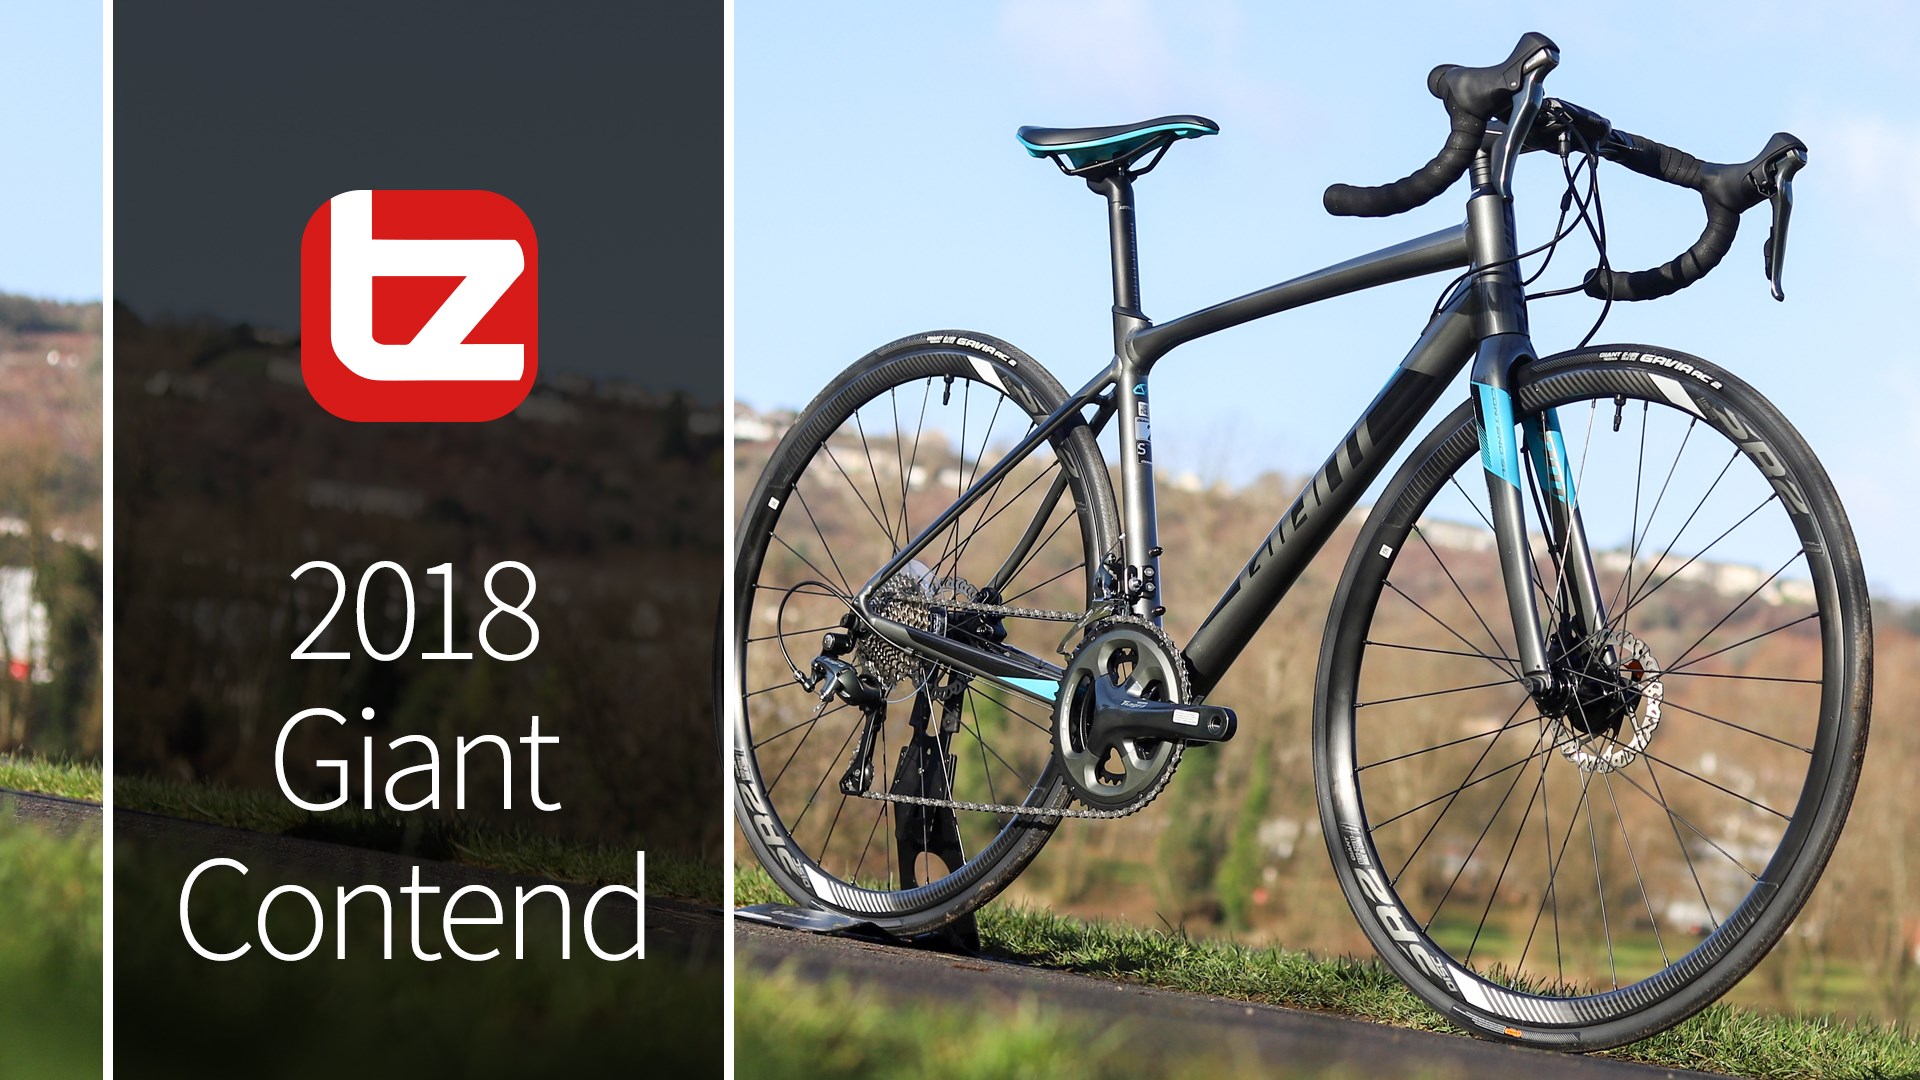 Giant Contend 2018 Range Review